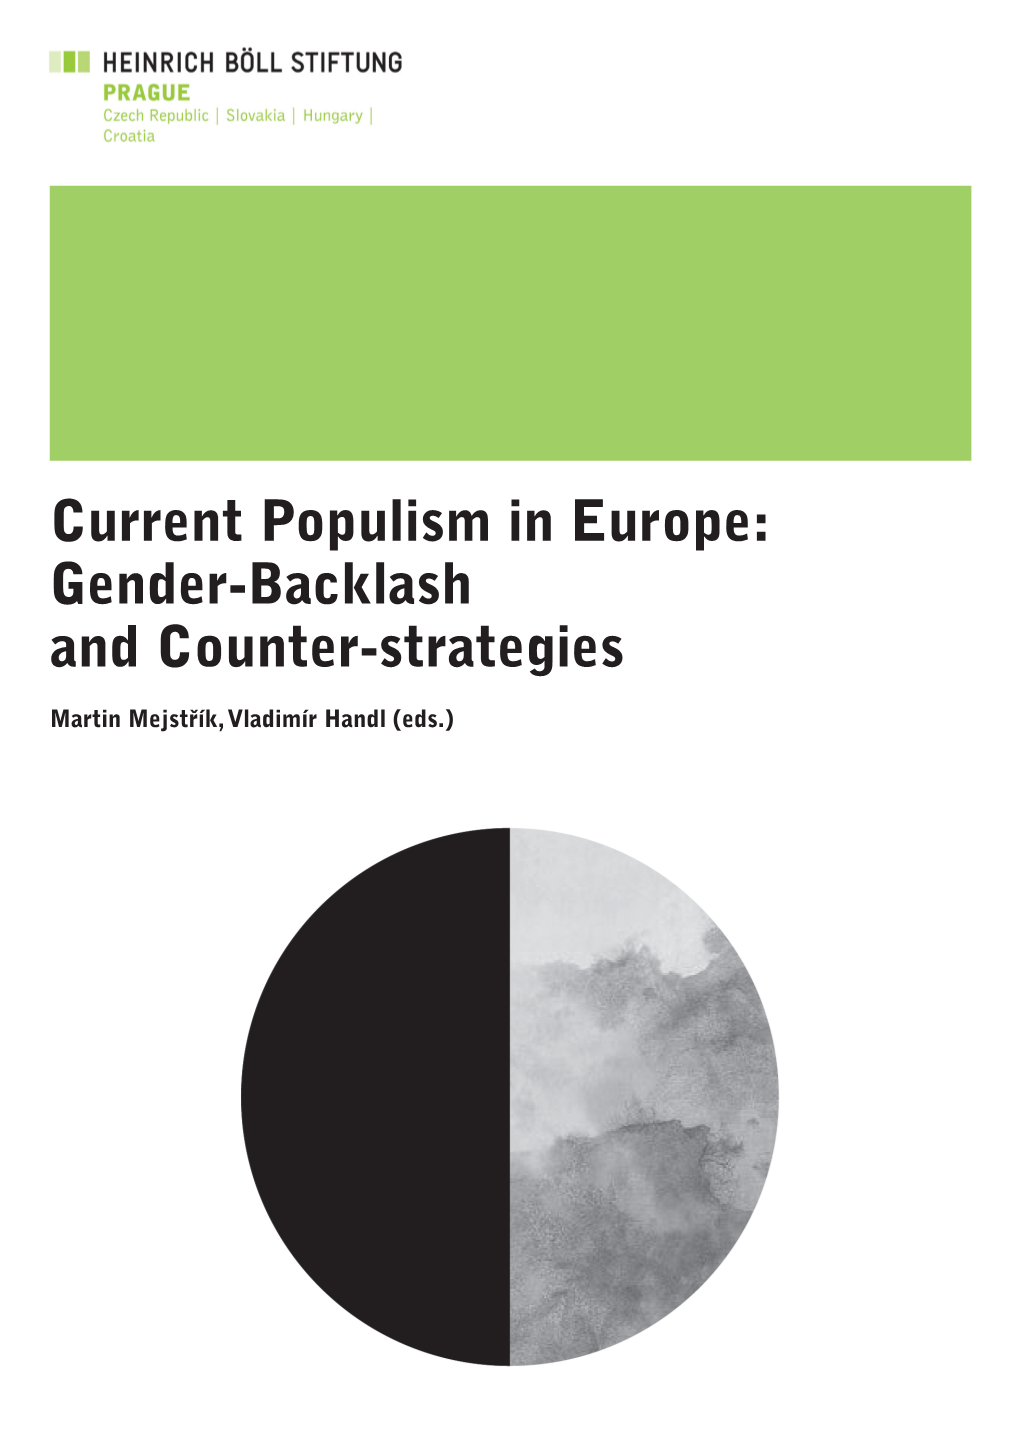 Current Populism in Europe: Gender-Backlash and Counter-Strategies